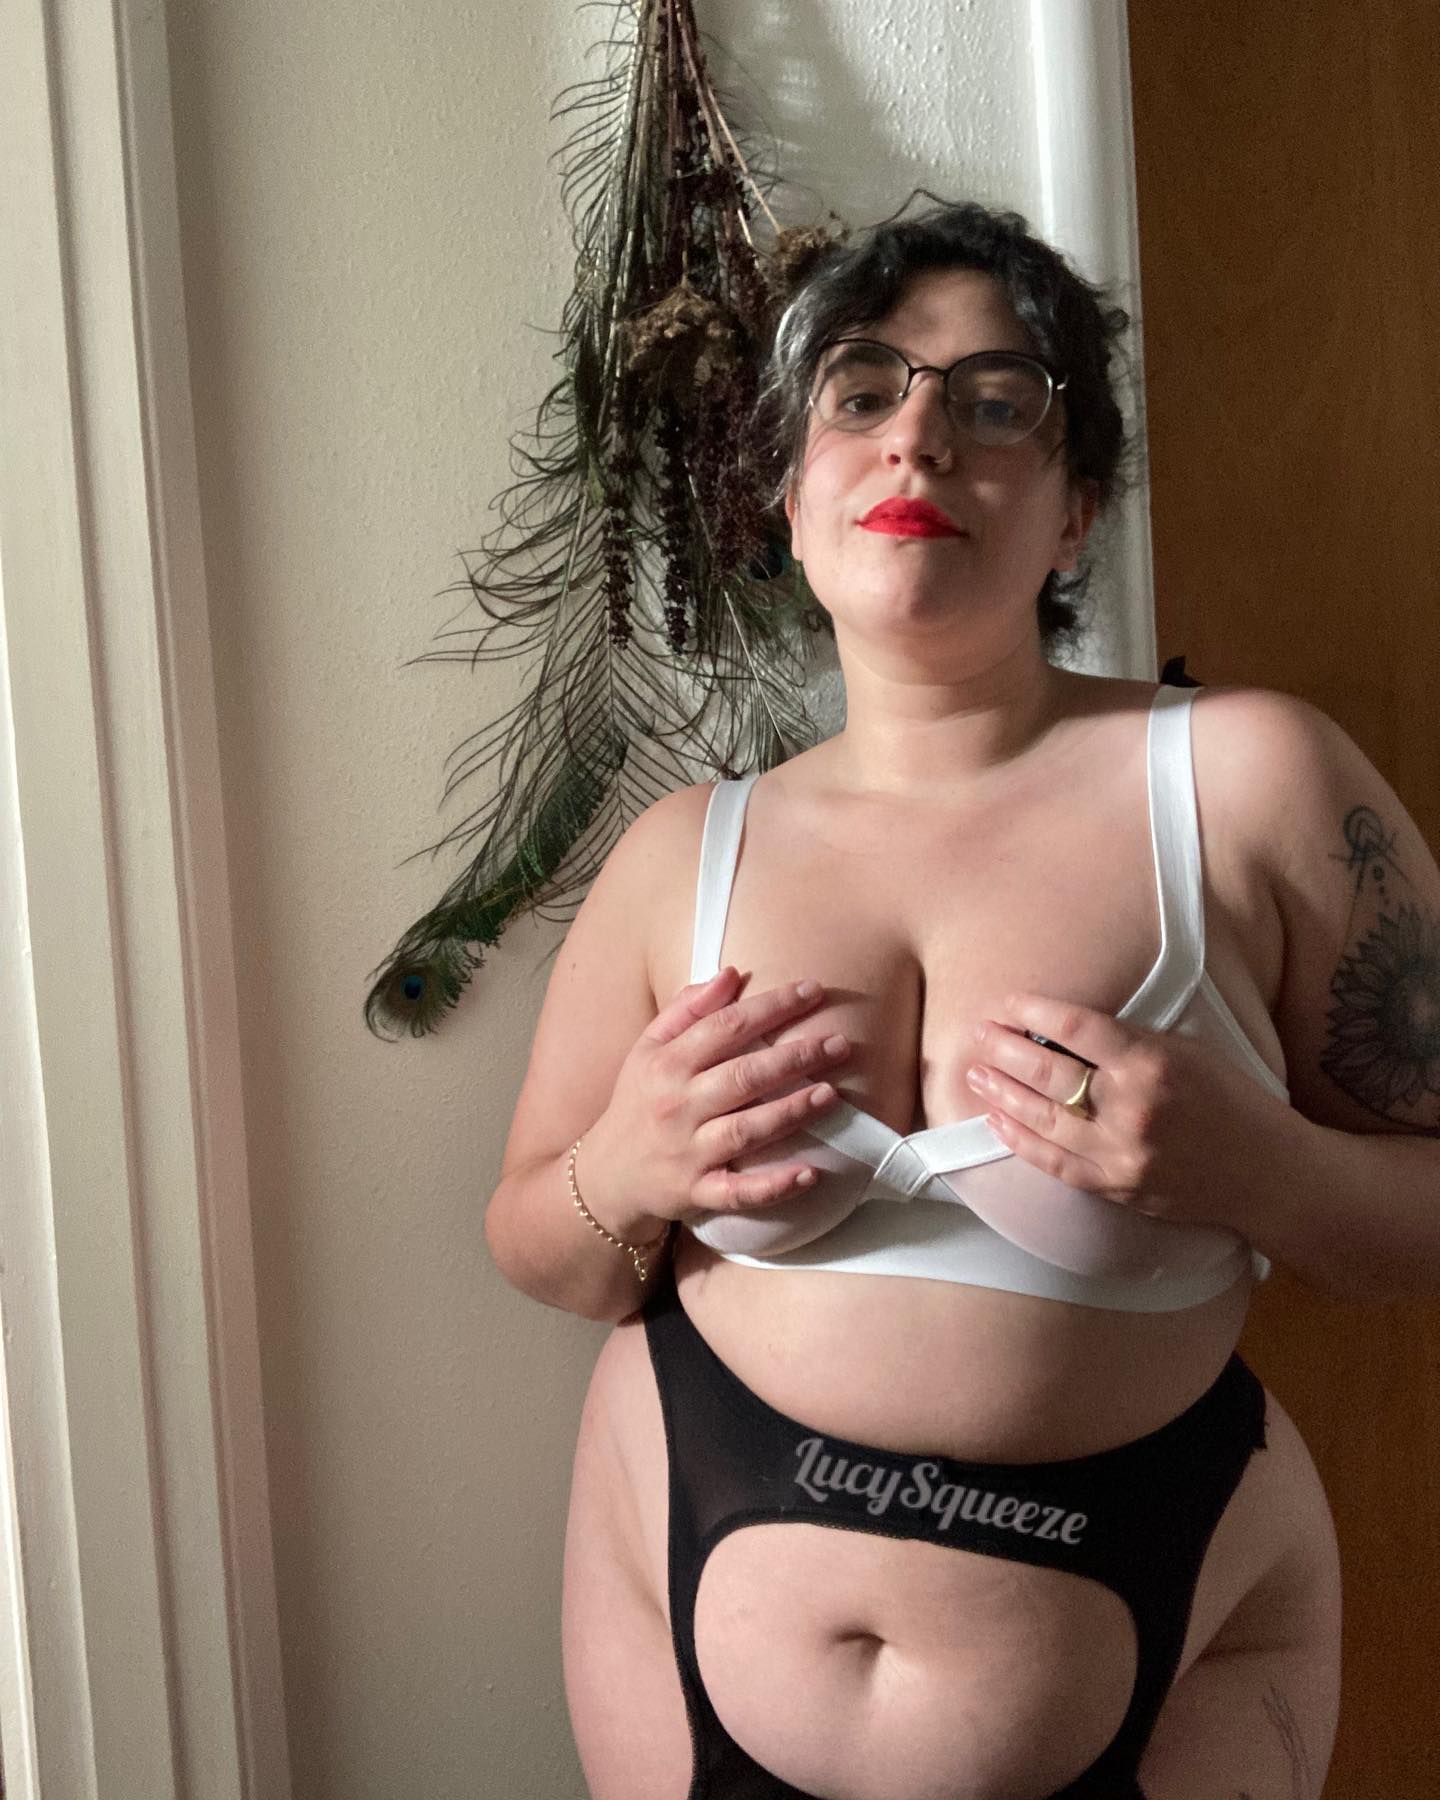 How are you gonna spoil yourself this V day? I can think of one way 🌶️ peep the link in my bio!
.
.
.
#curvy #busty #thick #thickwomen #queerfemme #hairy #hairywomen